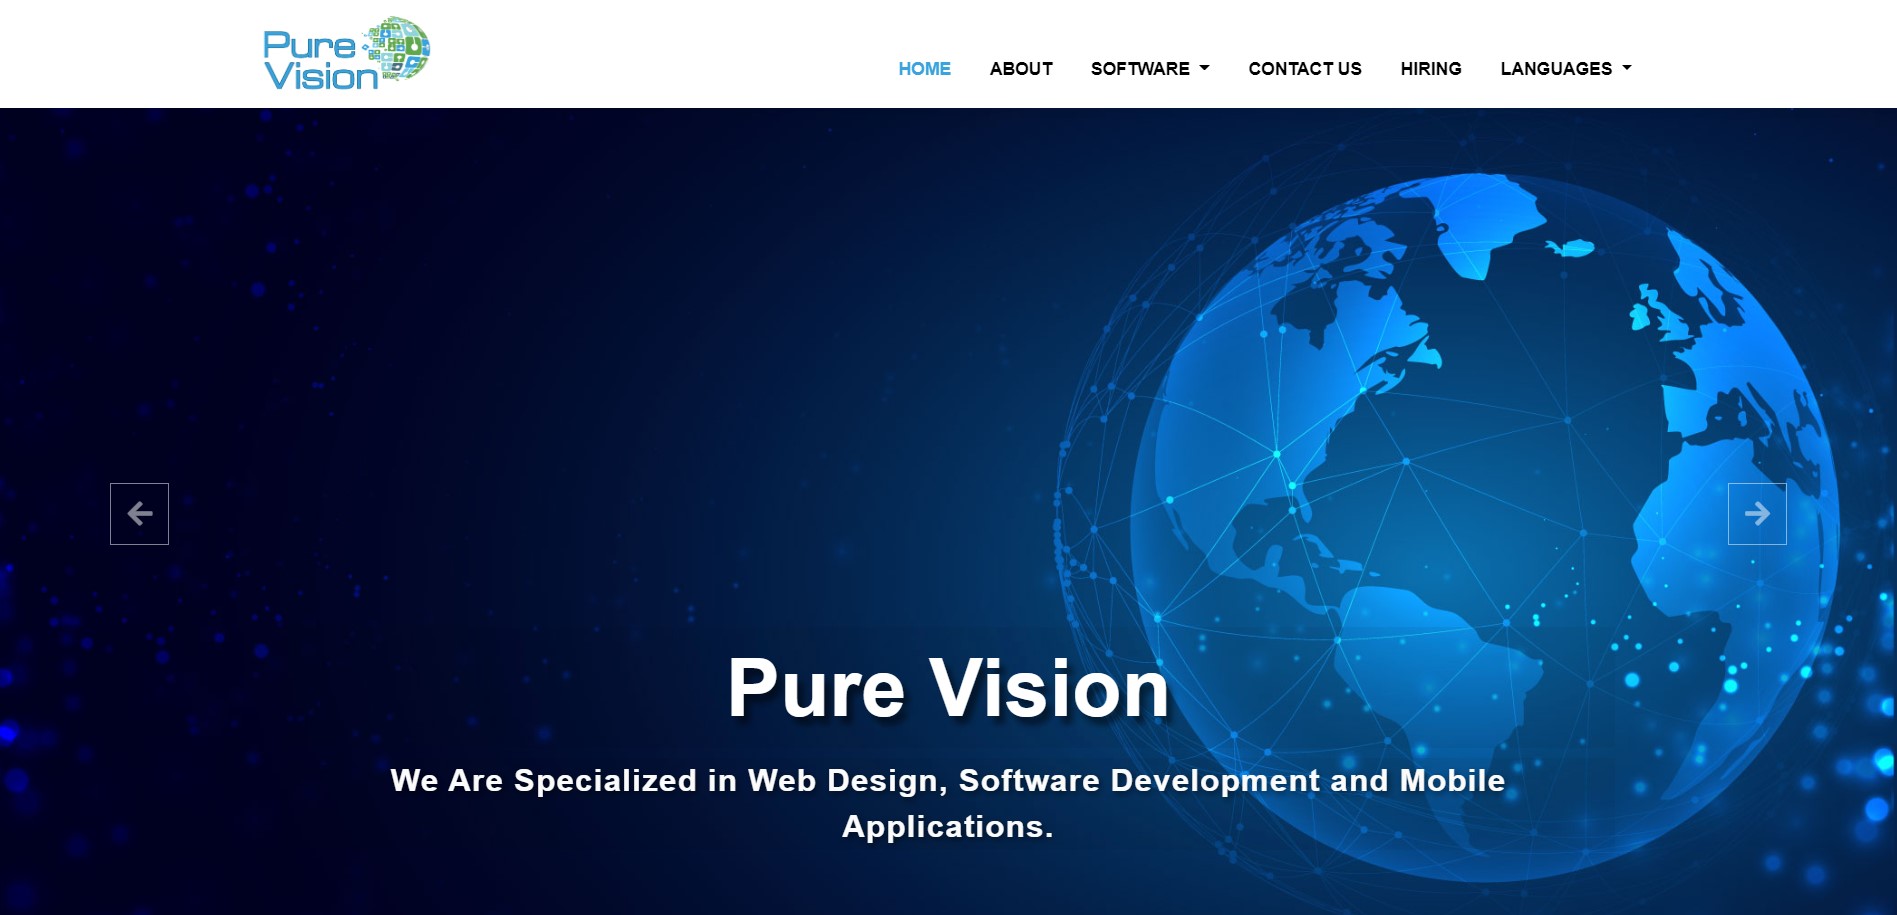 PureVision image